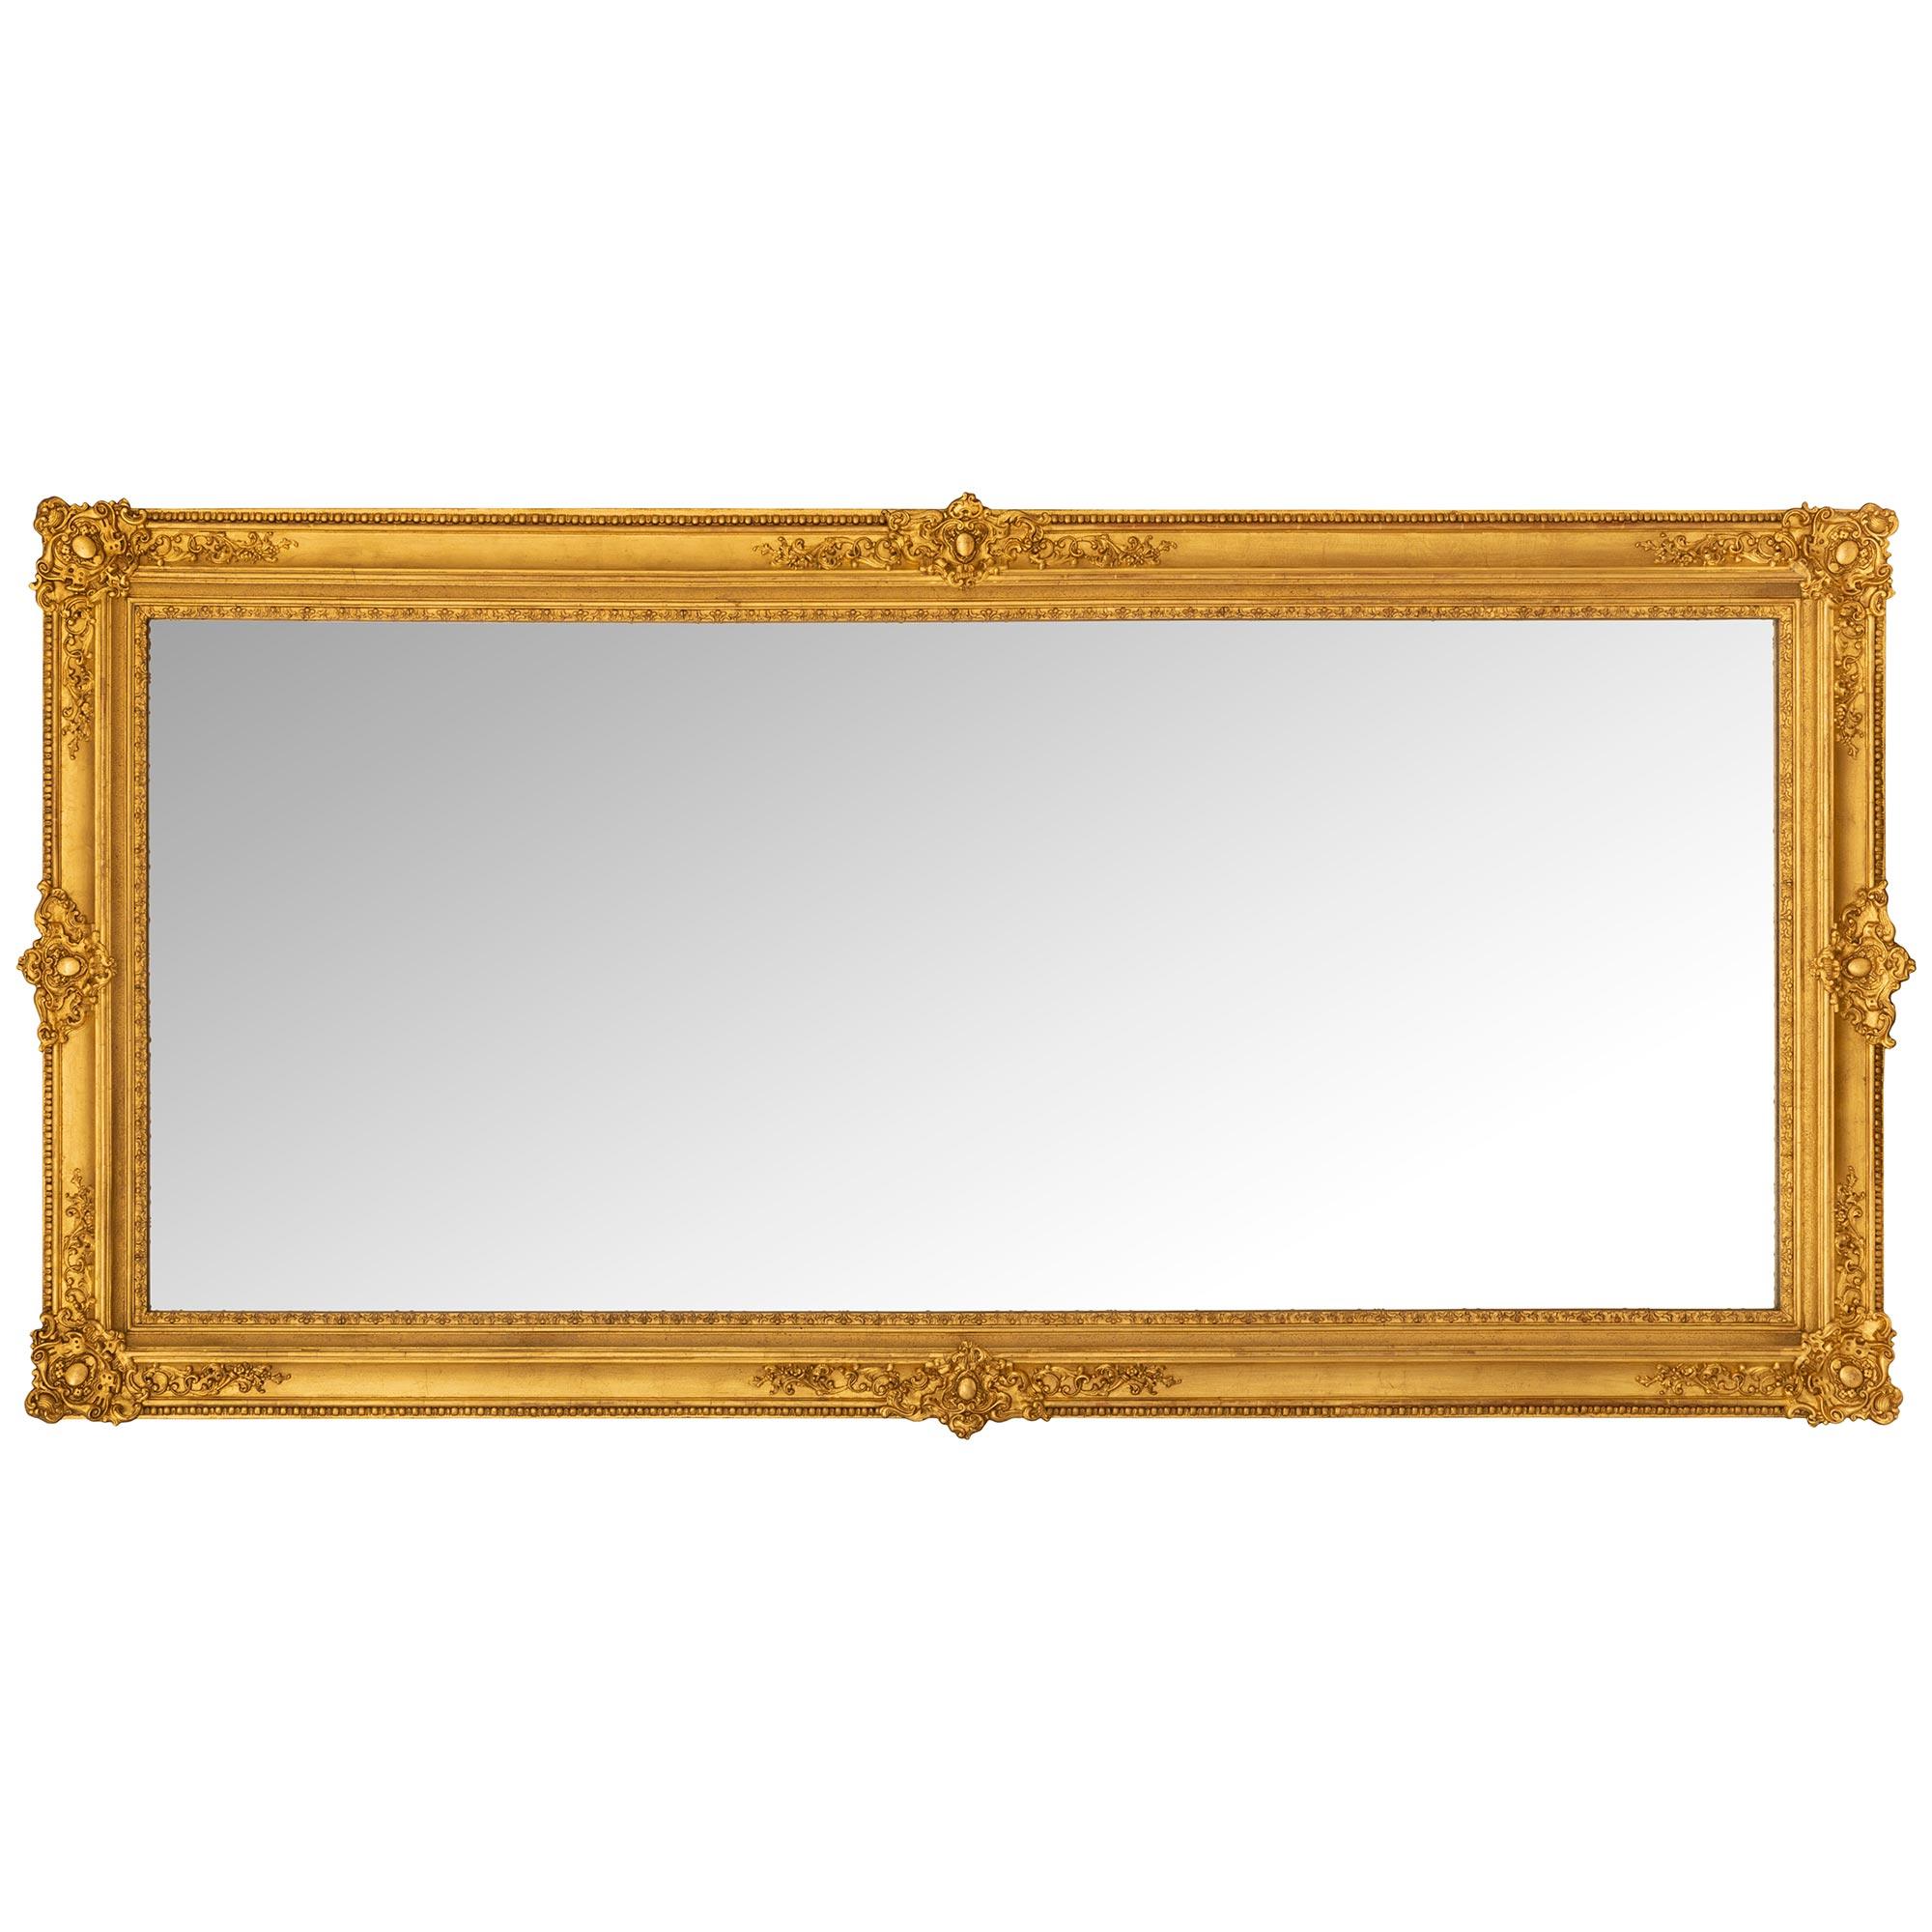 An elegant French mid 19th century Louis XVI st. Giltwood mirror. The mirror retains its original mirror plate framed within an elegant wrap around mottled border and a beautiful inner dentil moulding. The frame displays remarkable richly carved